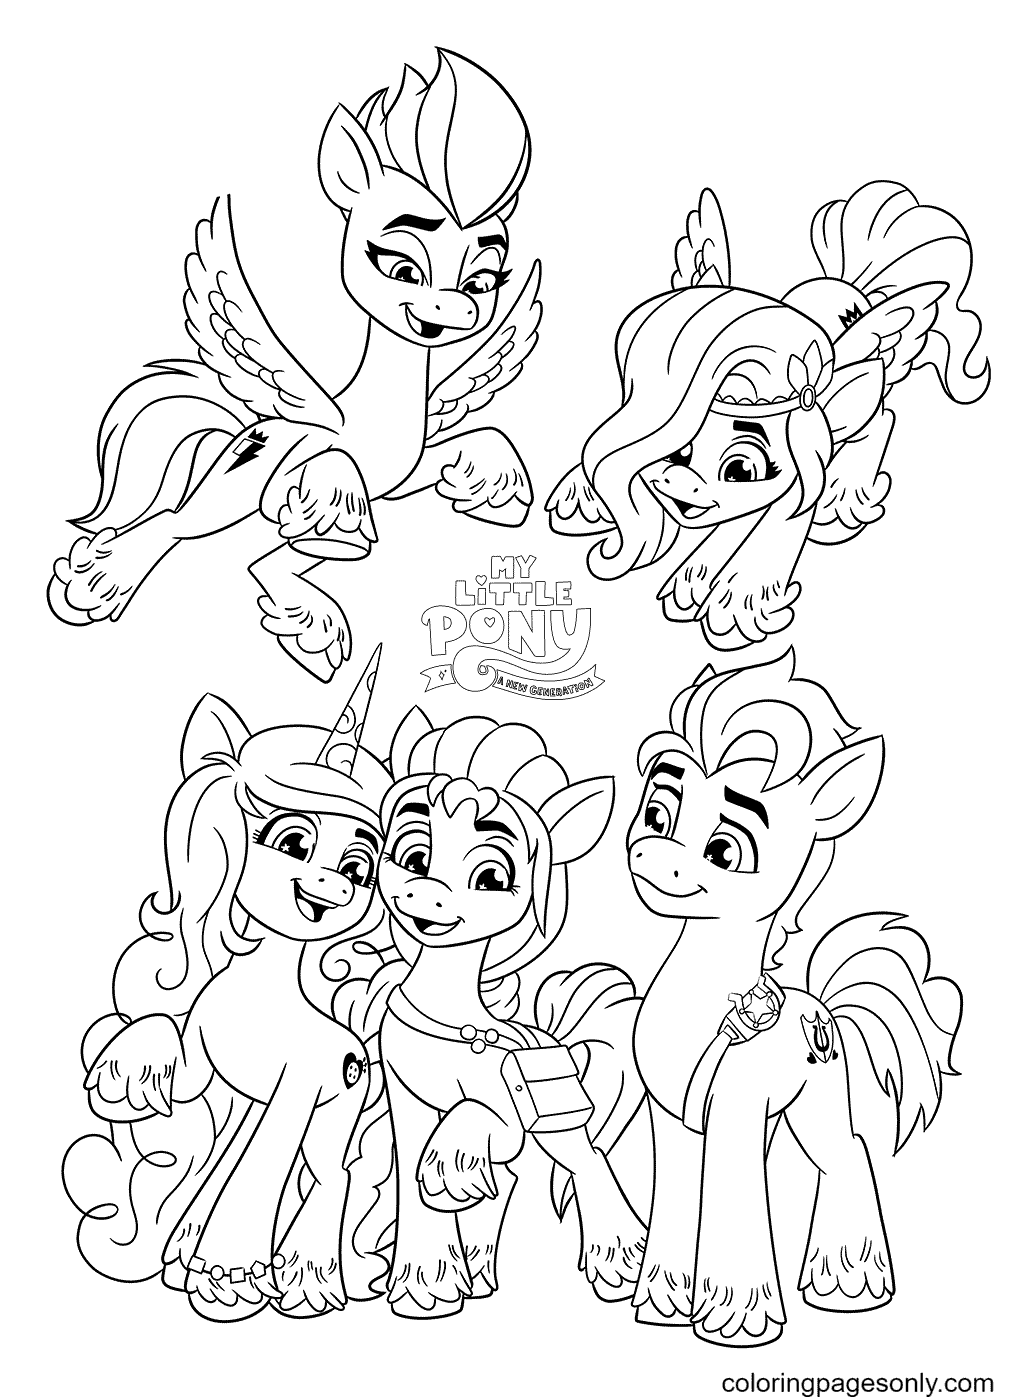 My Little Pony A New Generation movie Coloring Page